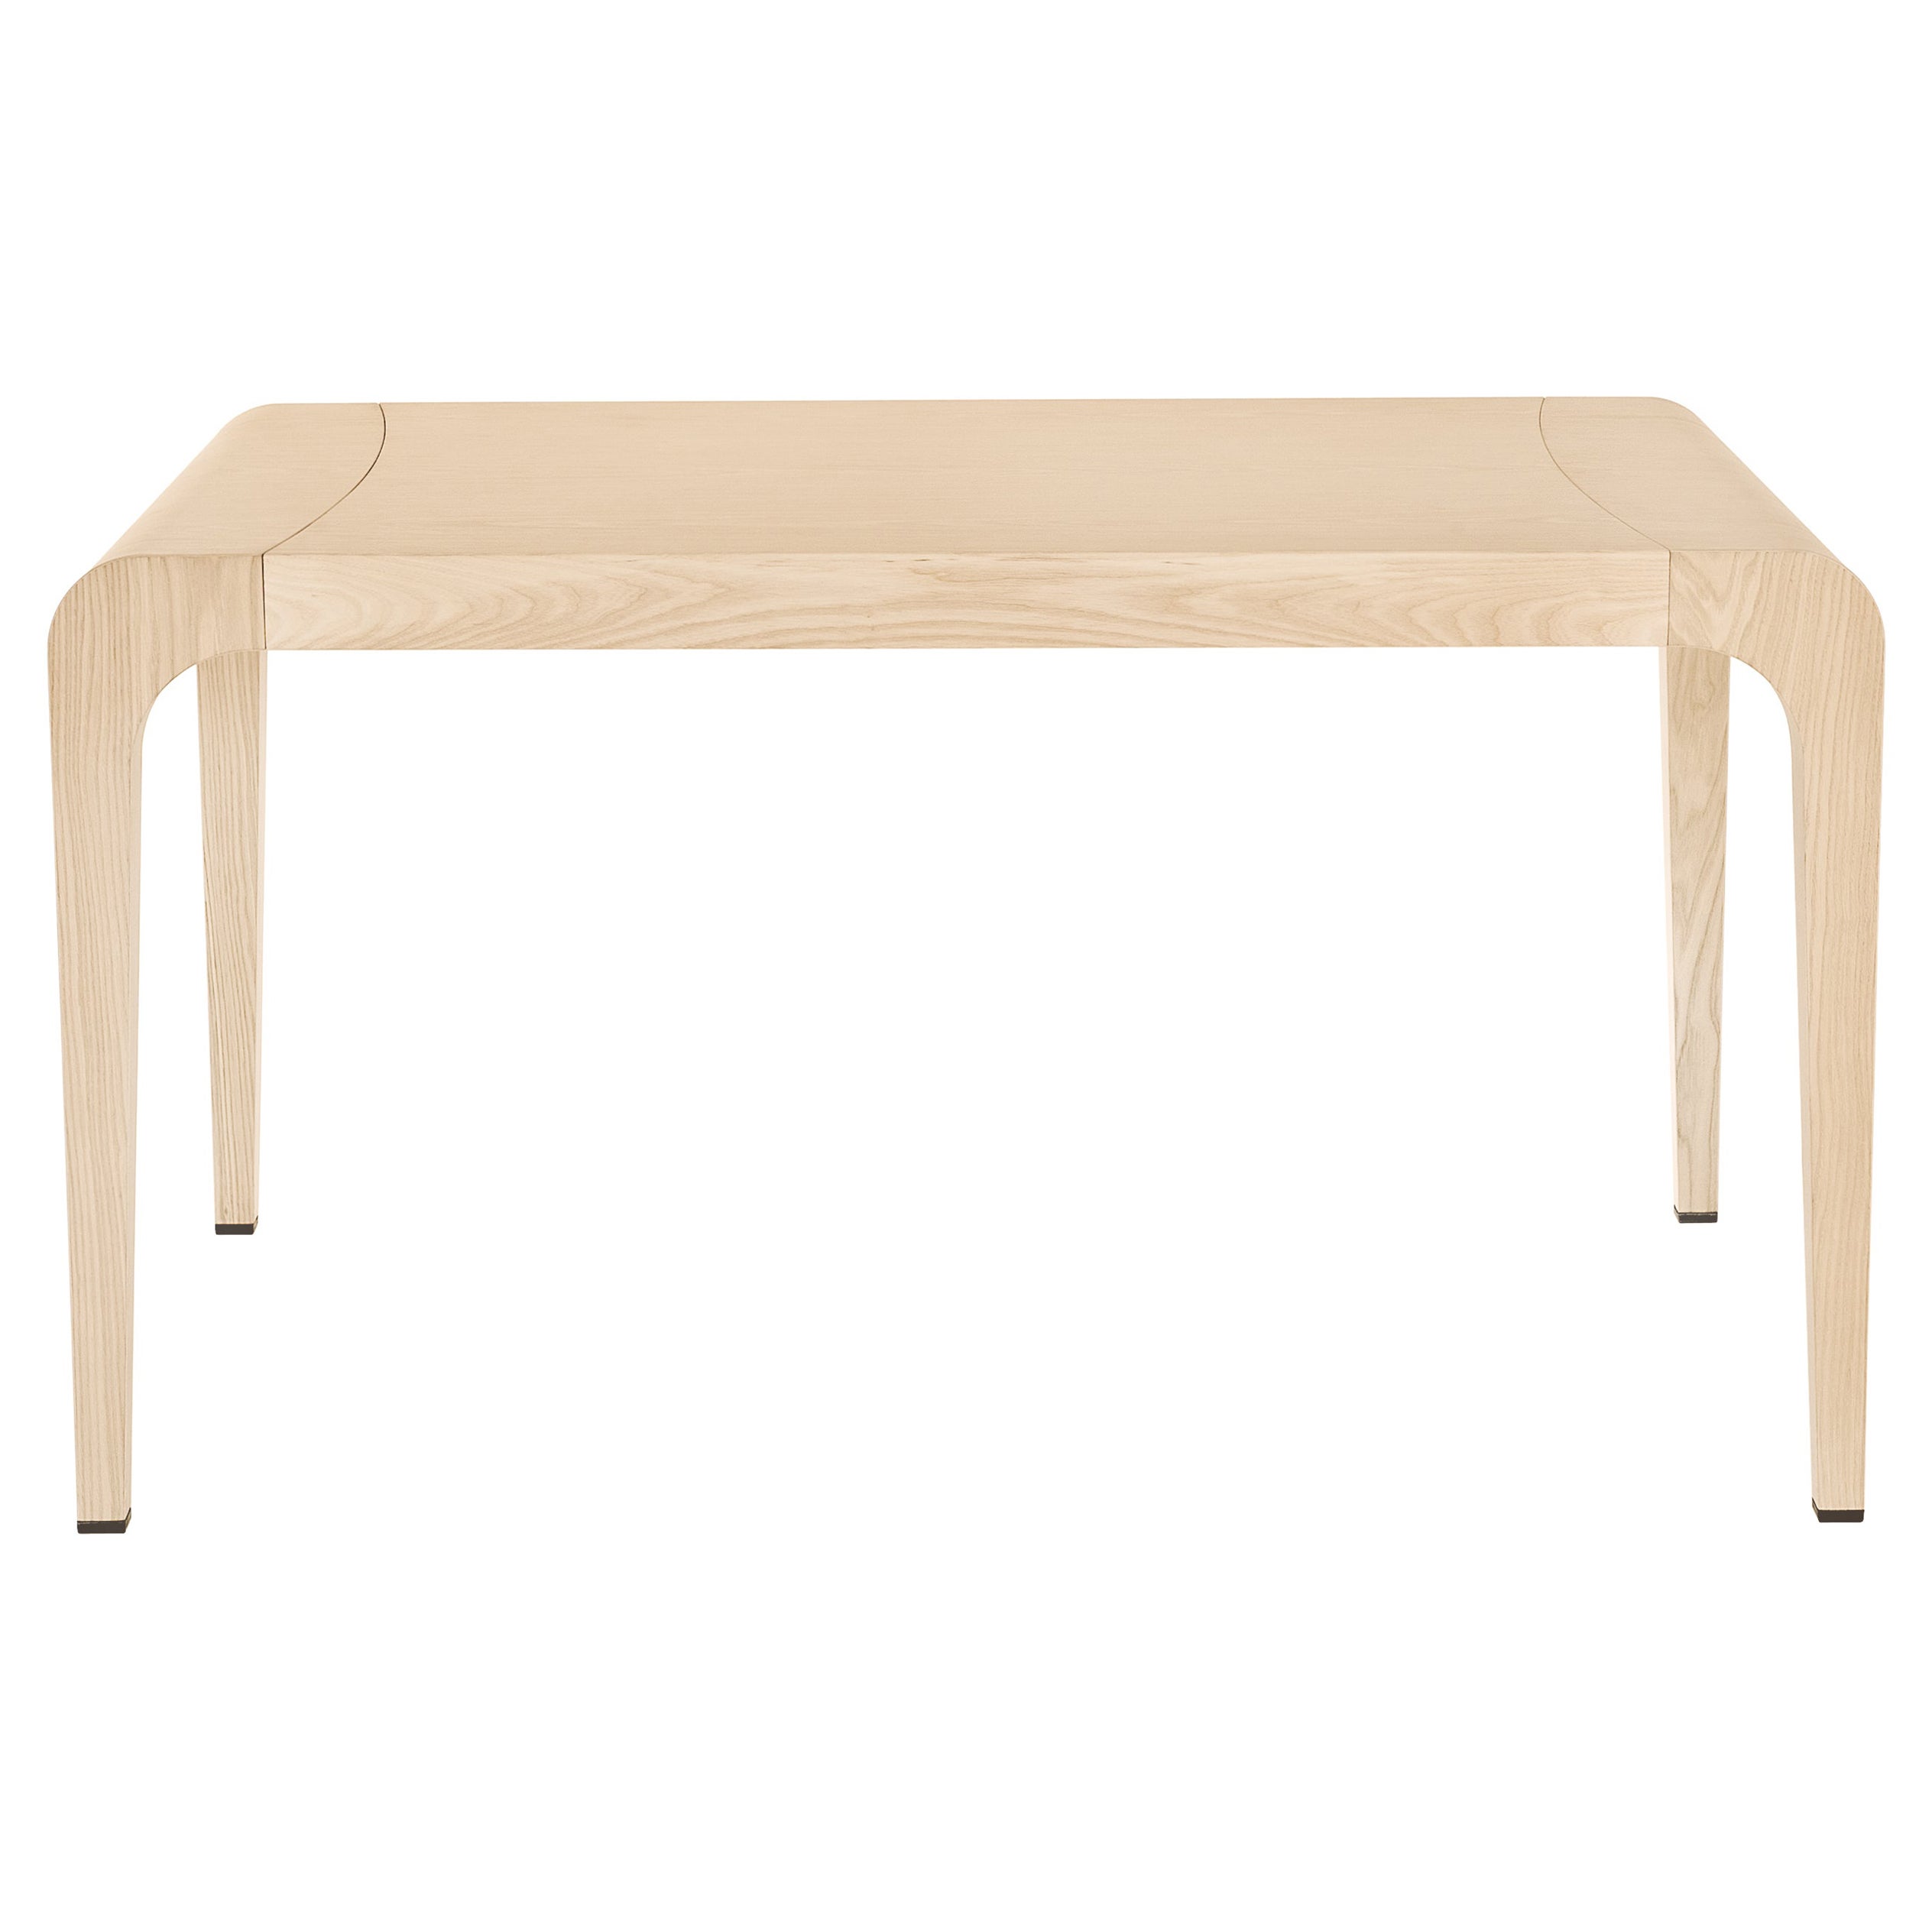 Alias Small 396 Ilvolo Extendable Table in Whitened Oak Top and Frame